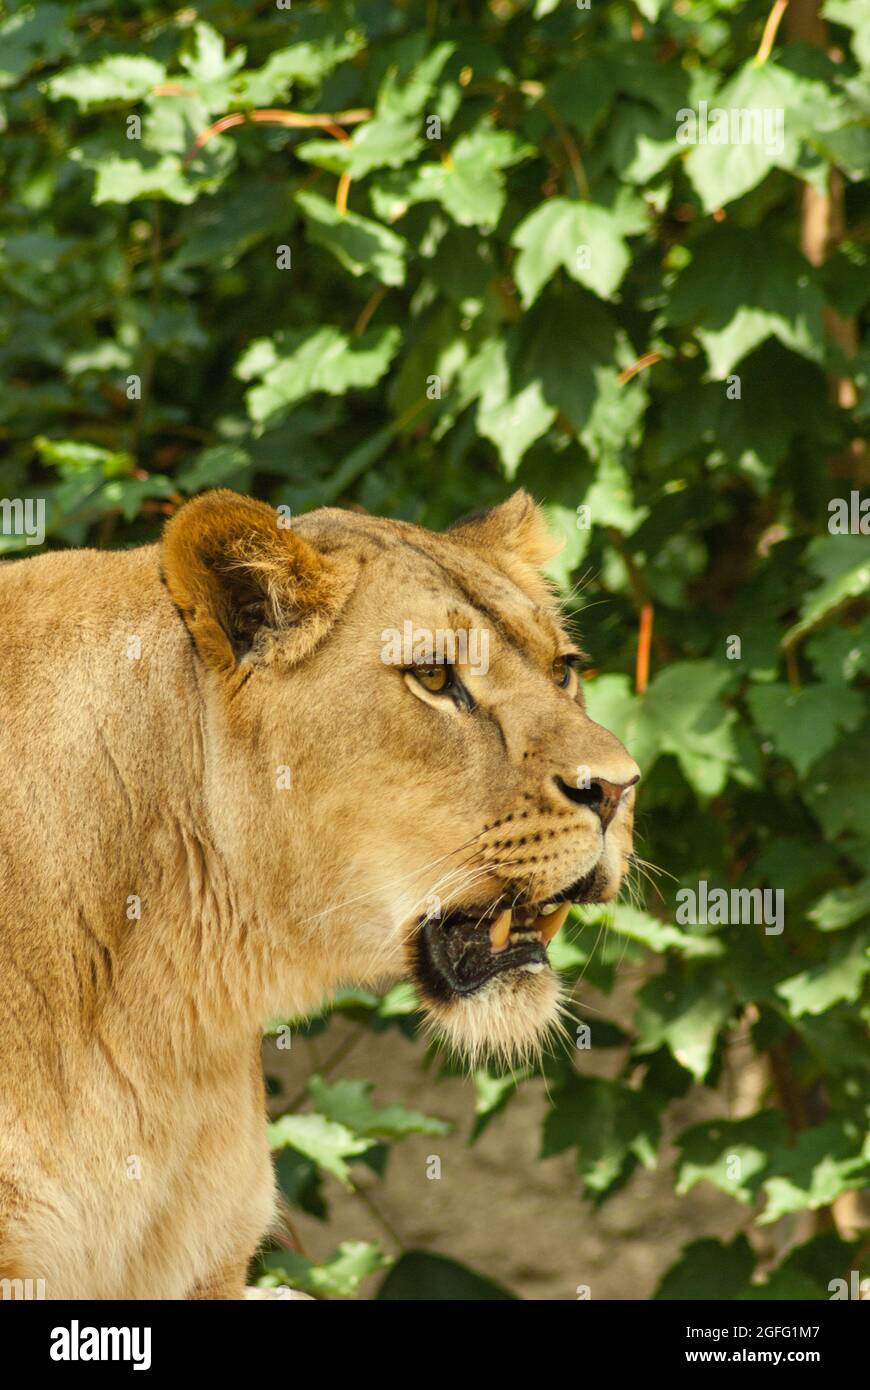 Profile of lioness hunter with open mouth and teeth visible, staring in the distance against green leaves background. Close-up, side view, portrait. Stock Photo